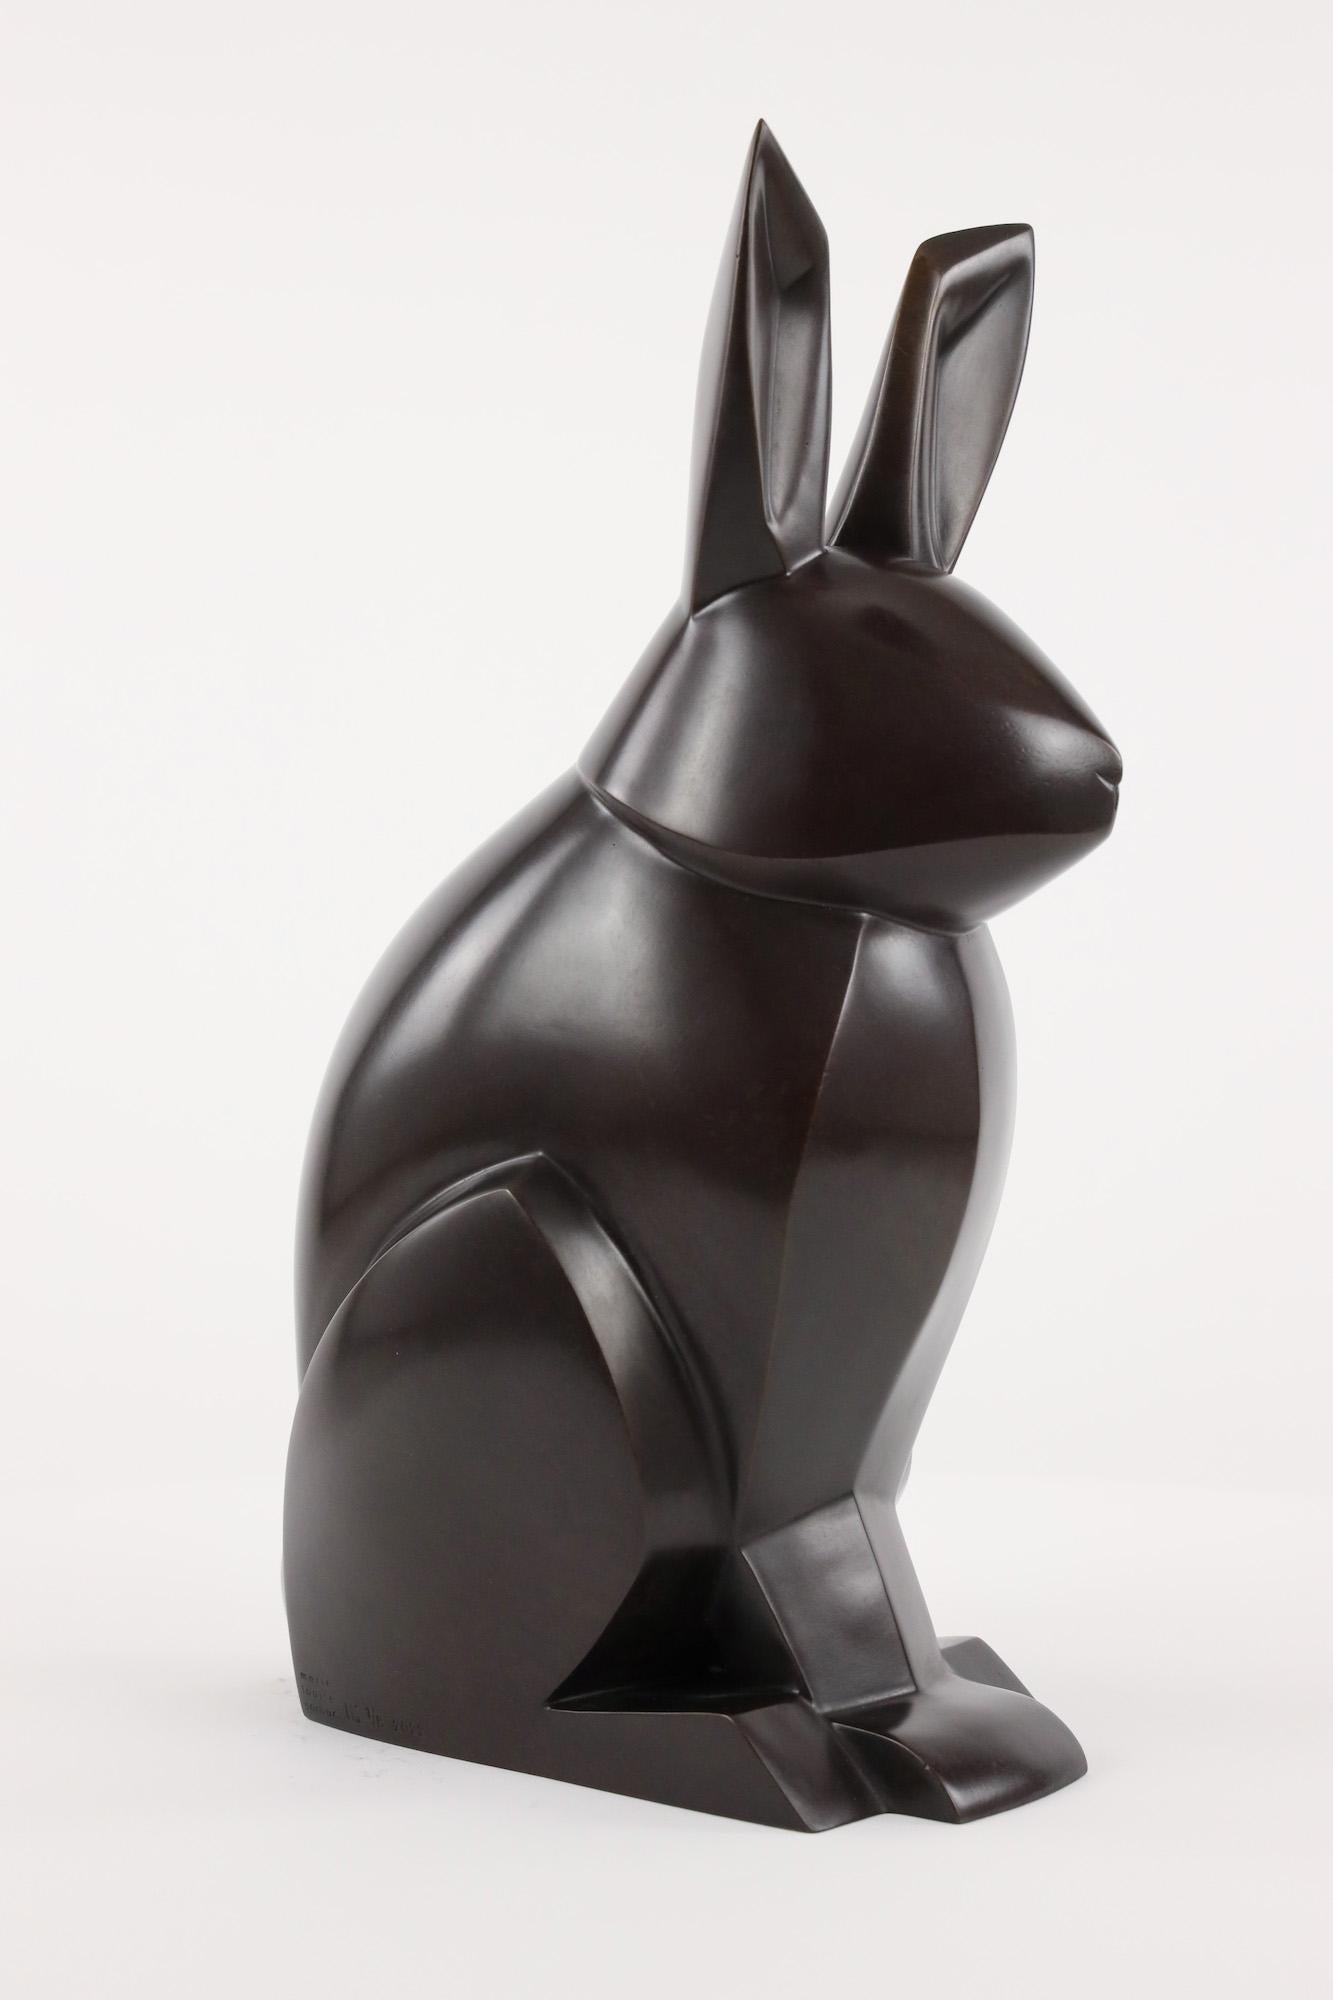 Ernest is a bronze sculpture by French contemporary artist Marie Louise Sorbac, dimensions are 40 × 16 × 27 cm (15.7 × 6.3 × 10.6 in).
The sculpture is signed and numbered, it is part of a limited edition of 8 editions + 4 artist’s proofs, and comes